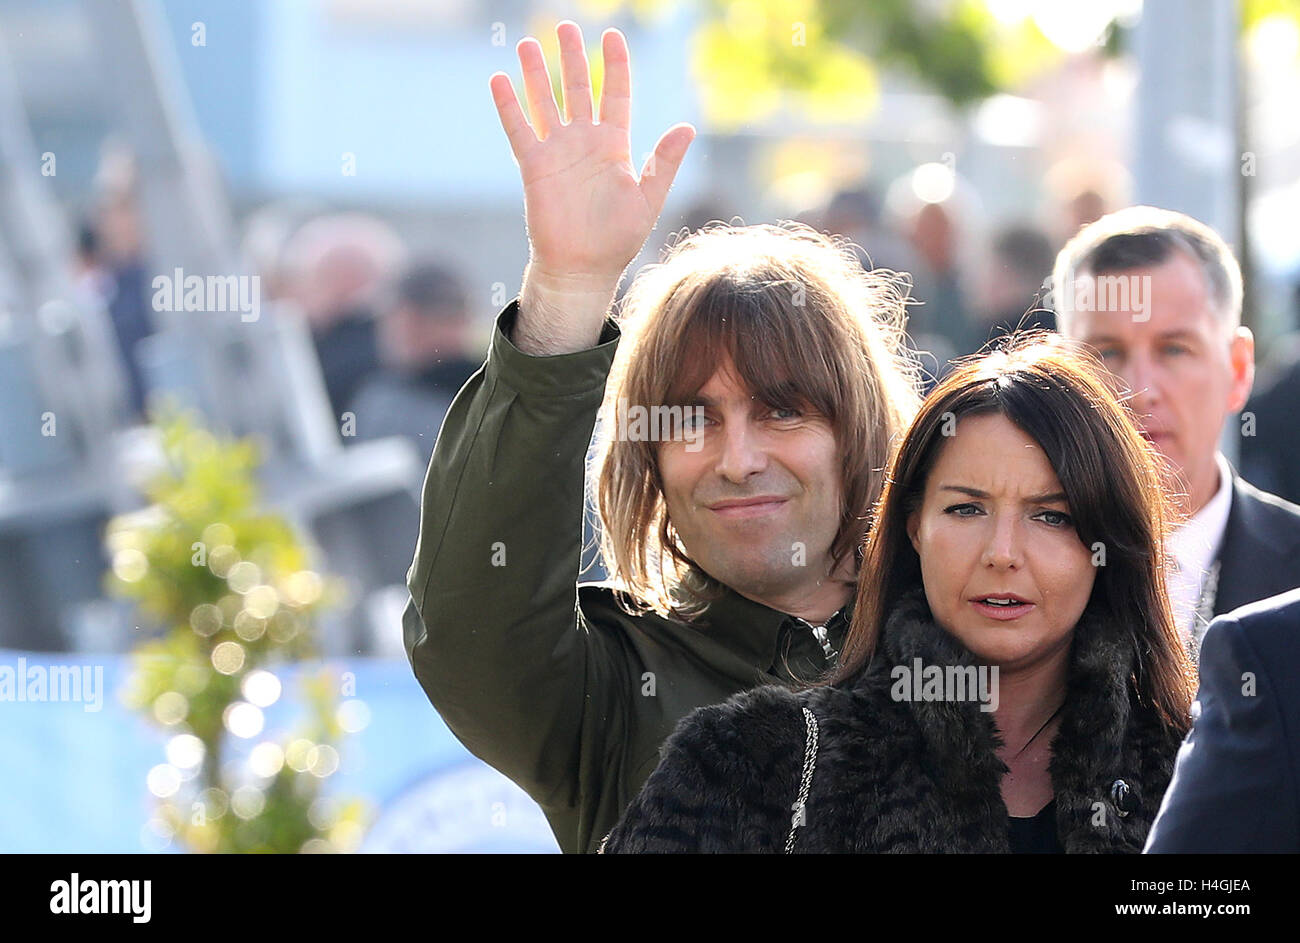 Liam Gallagher and girlfriend Debbie Gwyther arrive at the Etihad Stadium before the Premier League match at the Etihad Stadium, Manchester. PRESS ASSOCIATION Photo. Picture date: Saturday October 15, 2016. See PA story SOCCER Man City. Photo credit should read: Martin Rickett/PA Wire. RESTRICTIONS: EDITORIAL USE ONLY No use with unauthorised audio, video, data, fixture lists, club/league logos or 'live' services. Online in-match use limited to 75 images, no video emulation. No use in betting, games or single club/league/player publications. Stock Photo